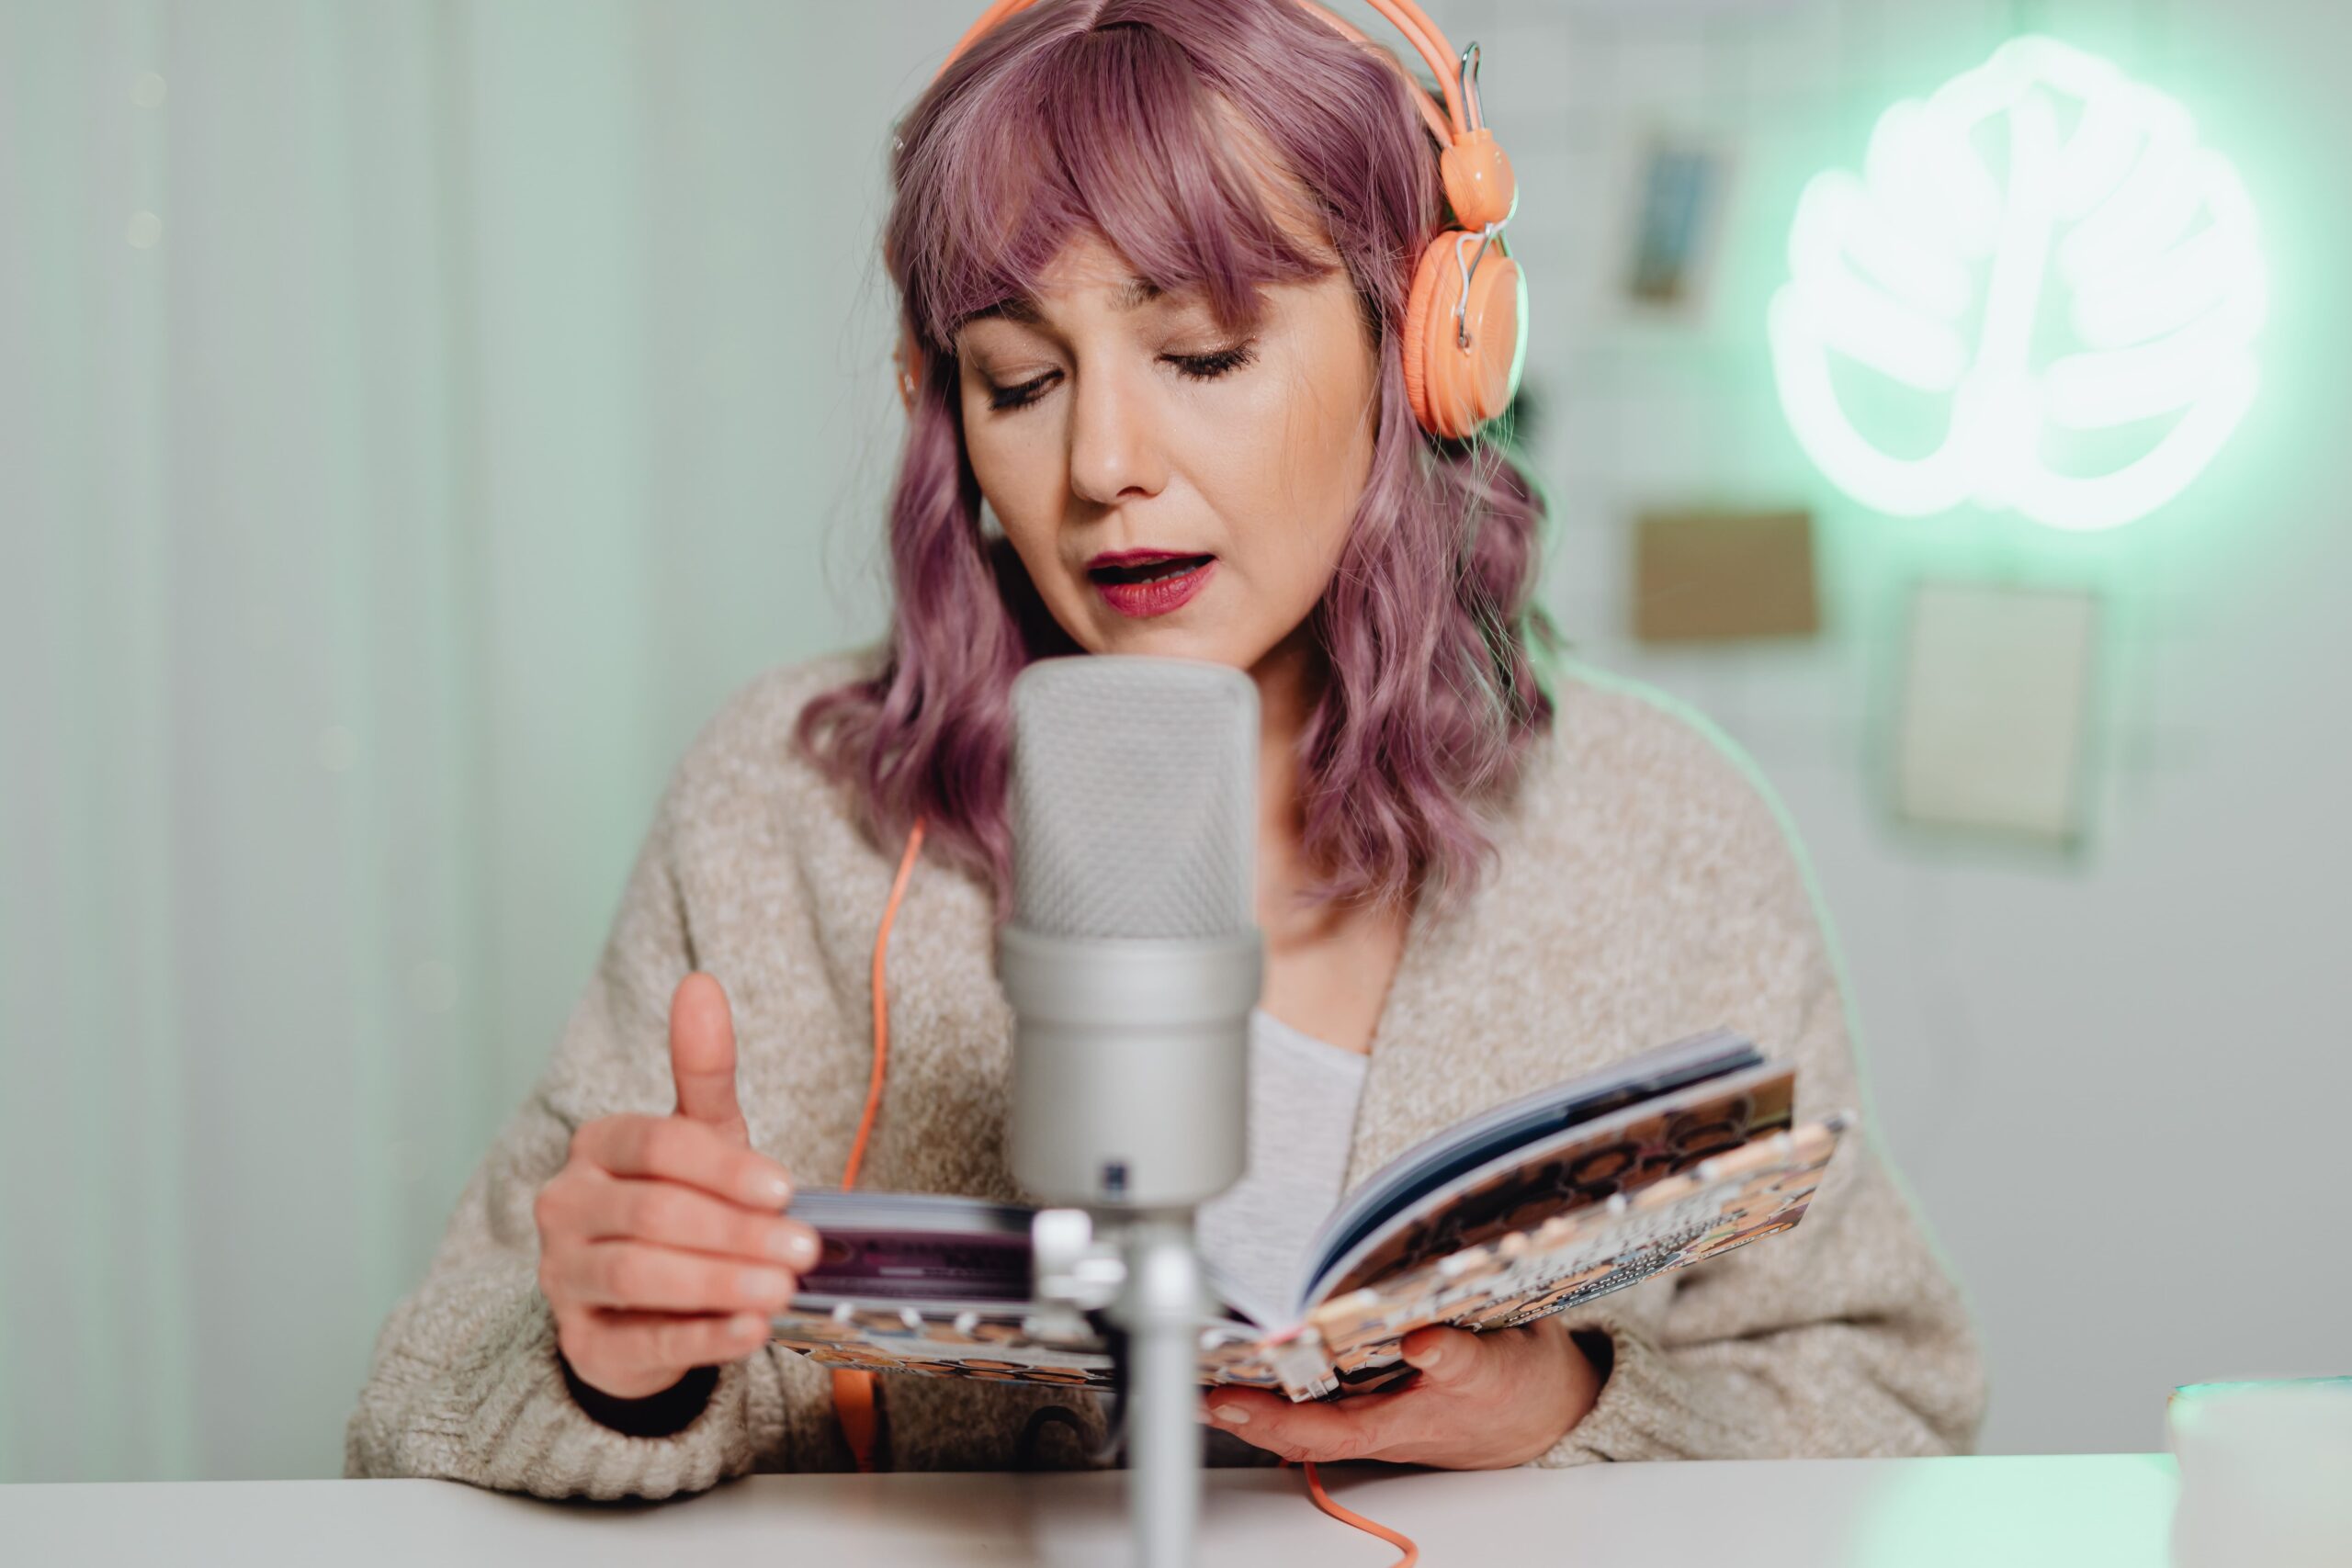 What are podcasts and why are they booming?